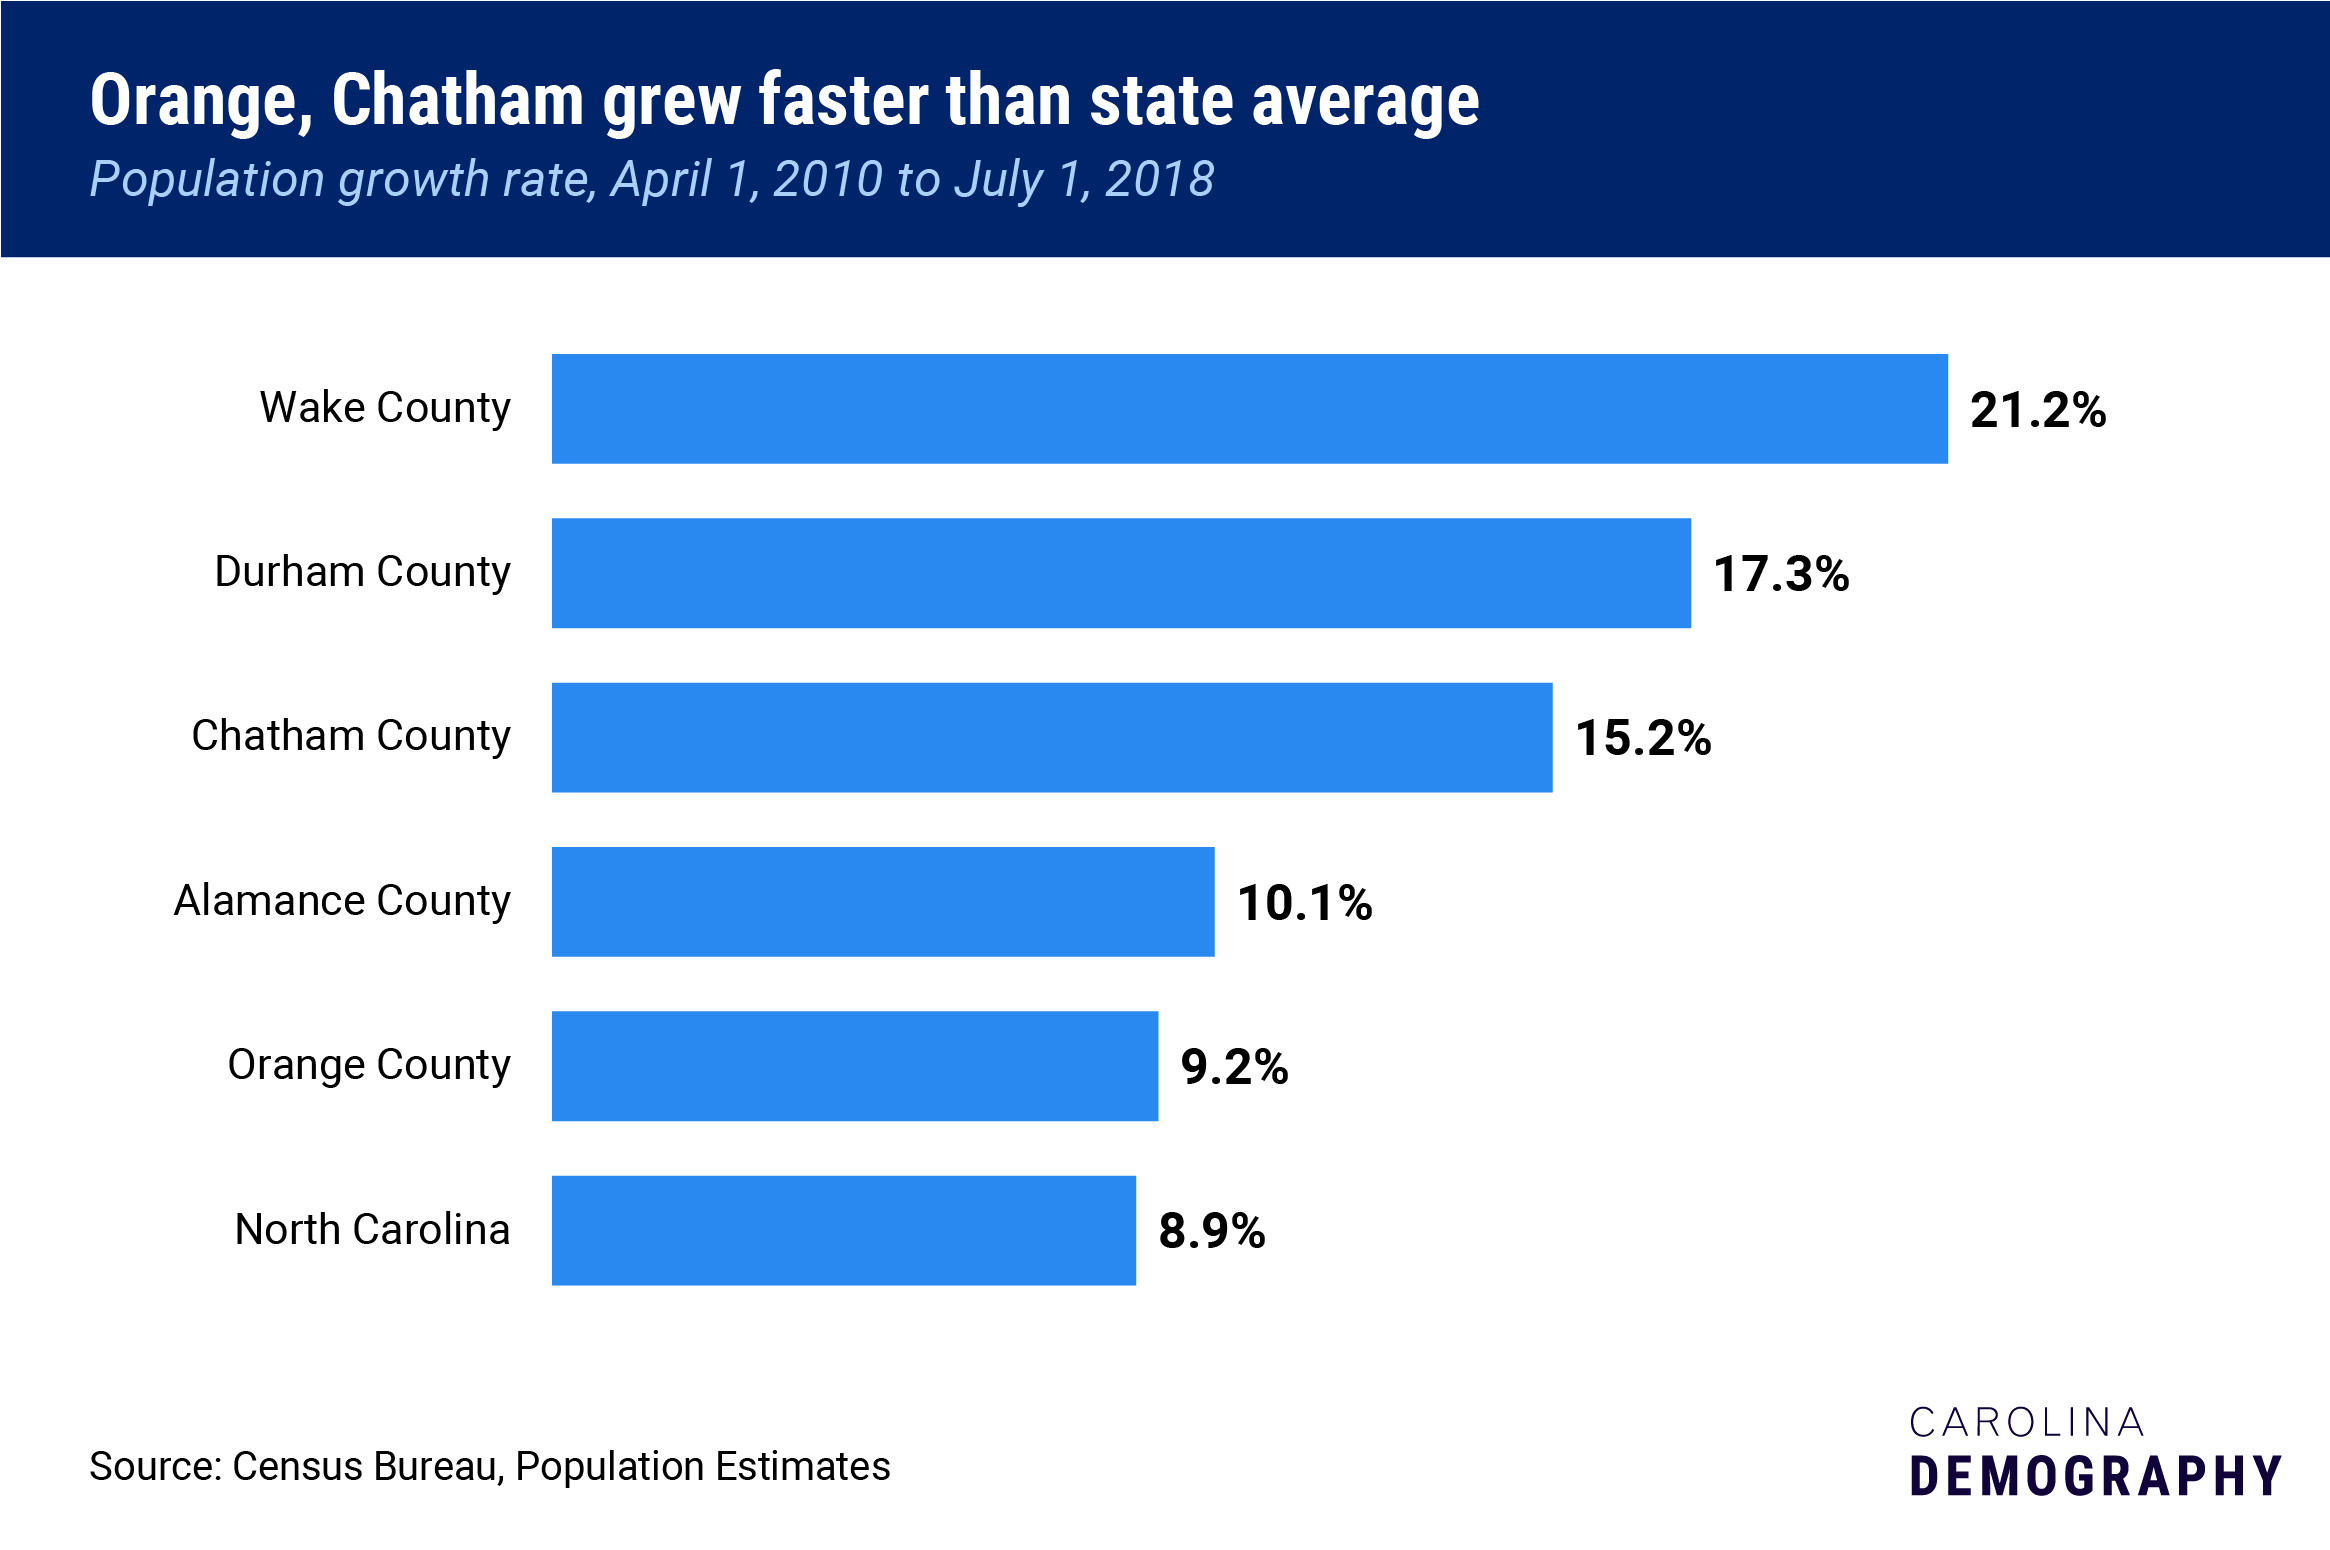 Orange, Chatham grew faster than state average, Population growth rate, April 1, 2010 to July 1, 2018